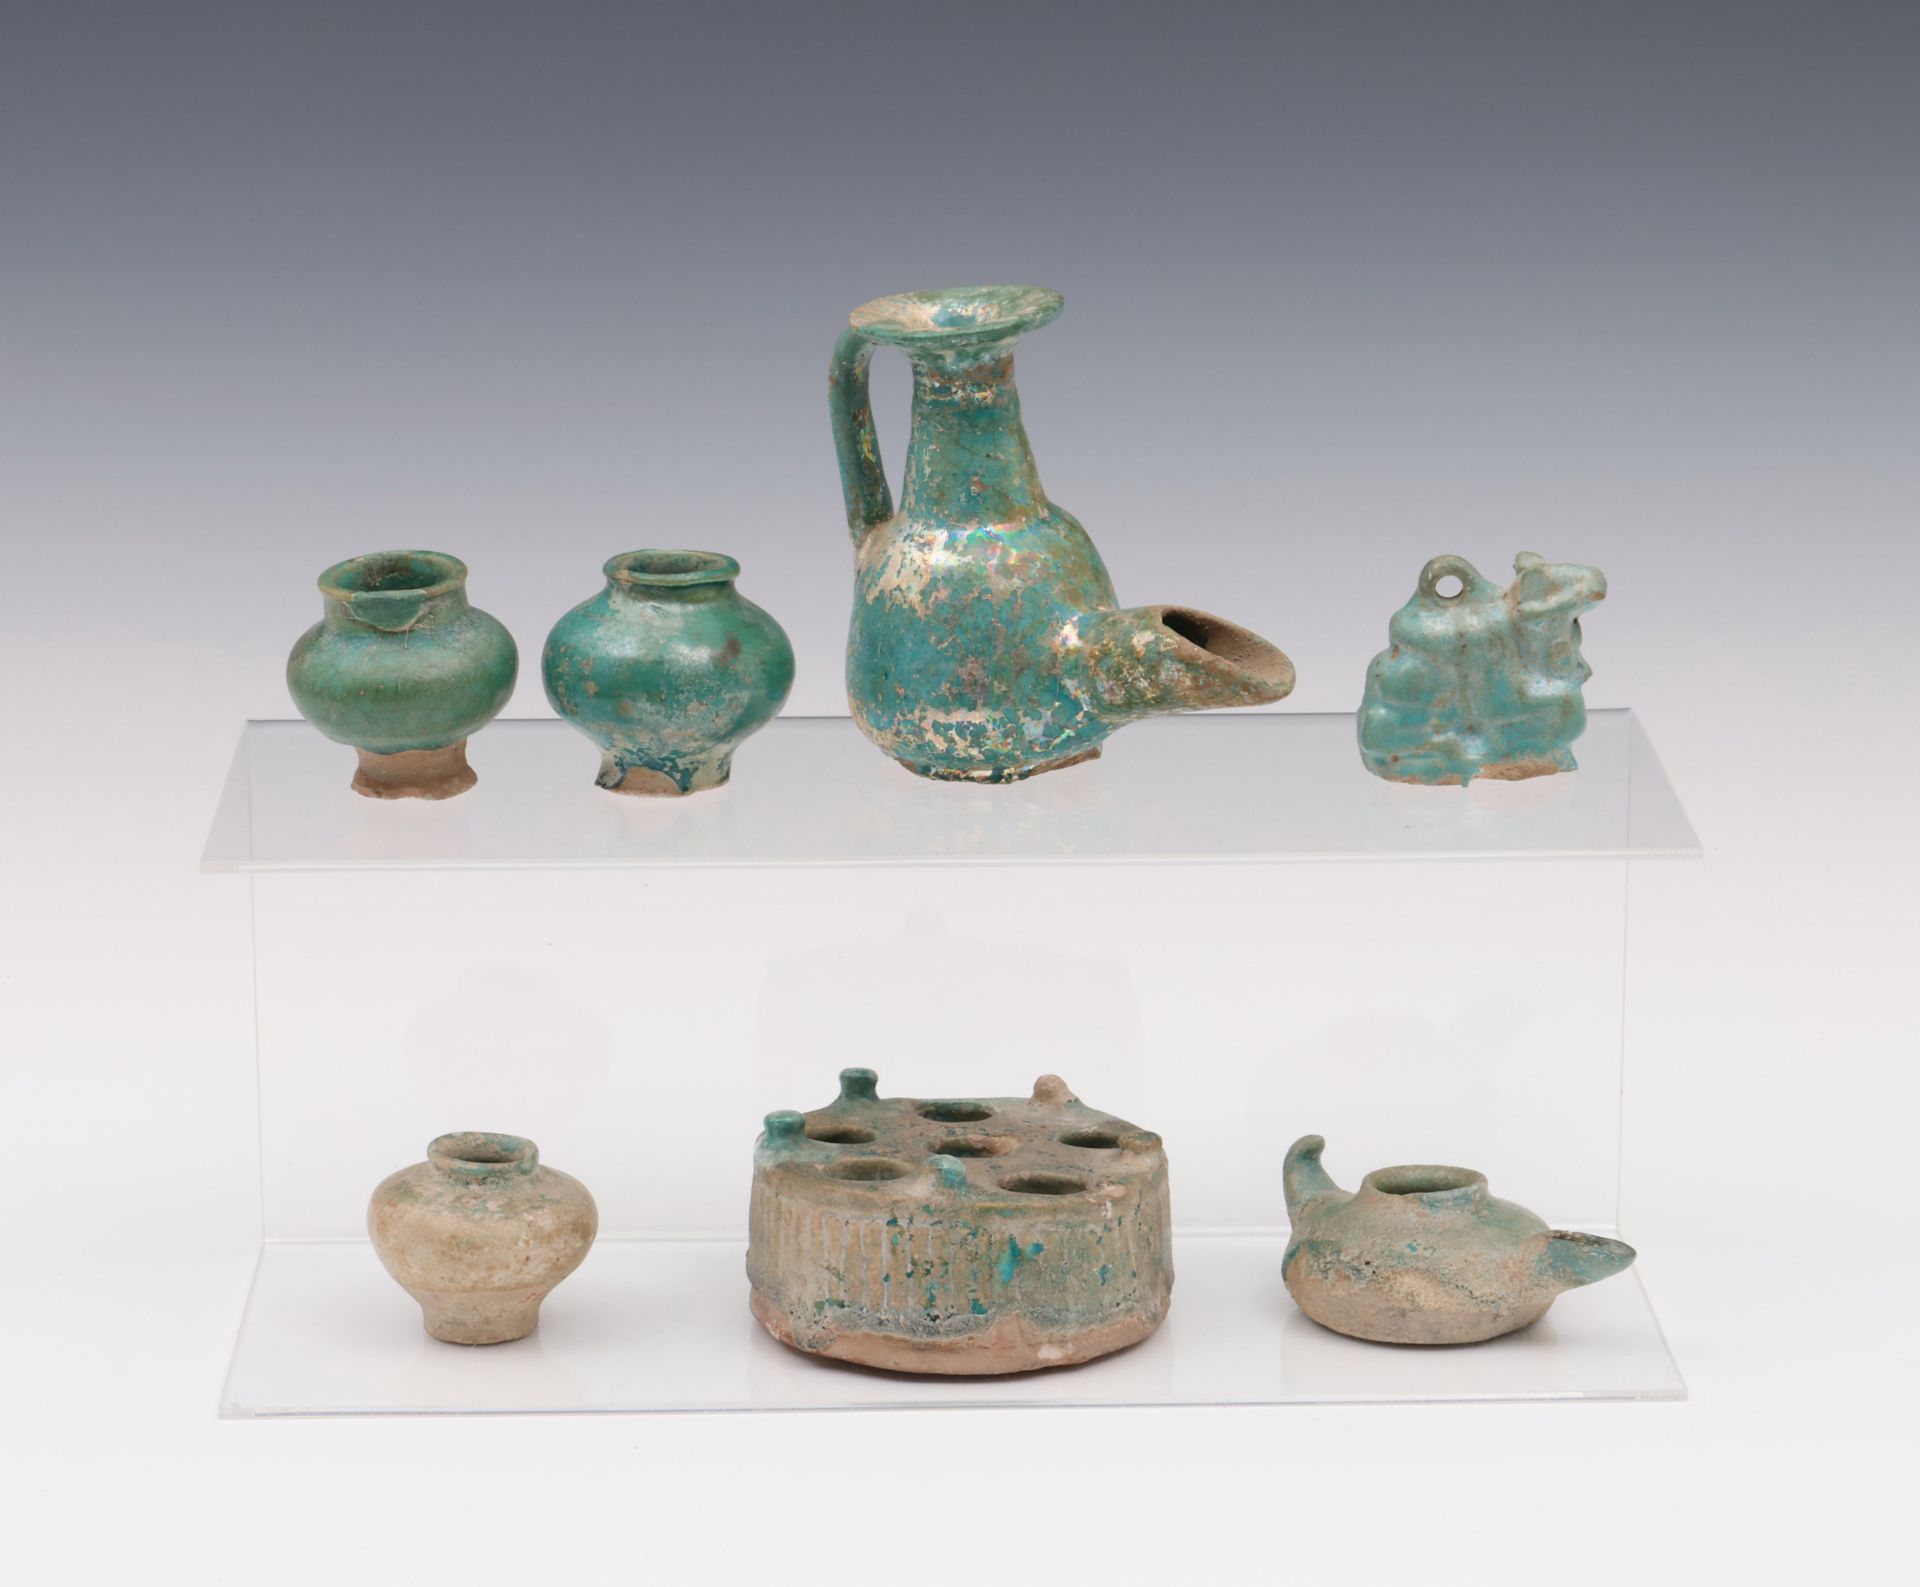 A collection of seven turkois glazed objects, Middle East, Persia 13th century and later;